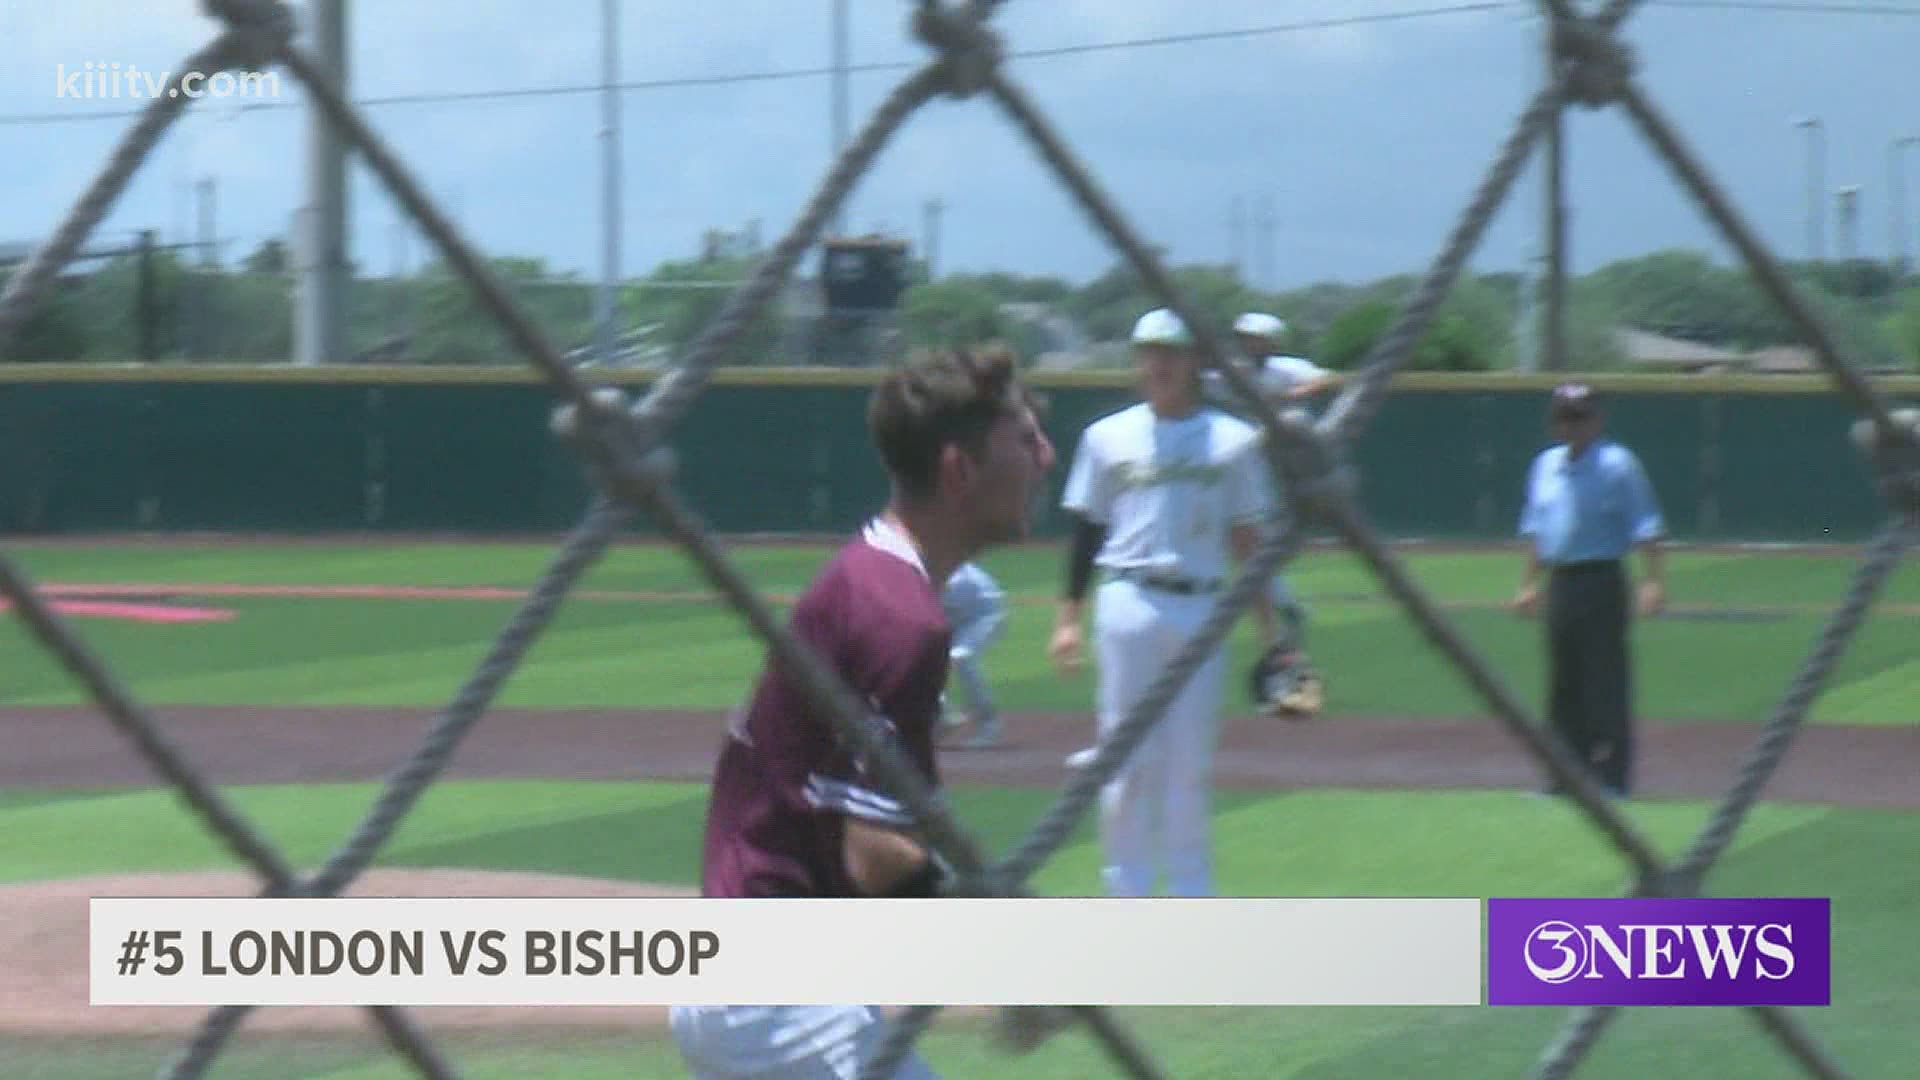 The London Pirates faced off against the Bishop Badgers at Cabaniss Field.